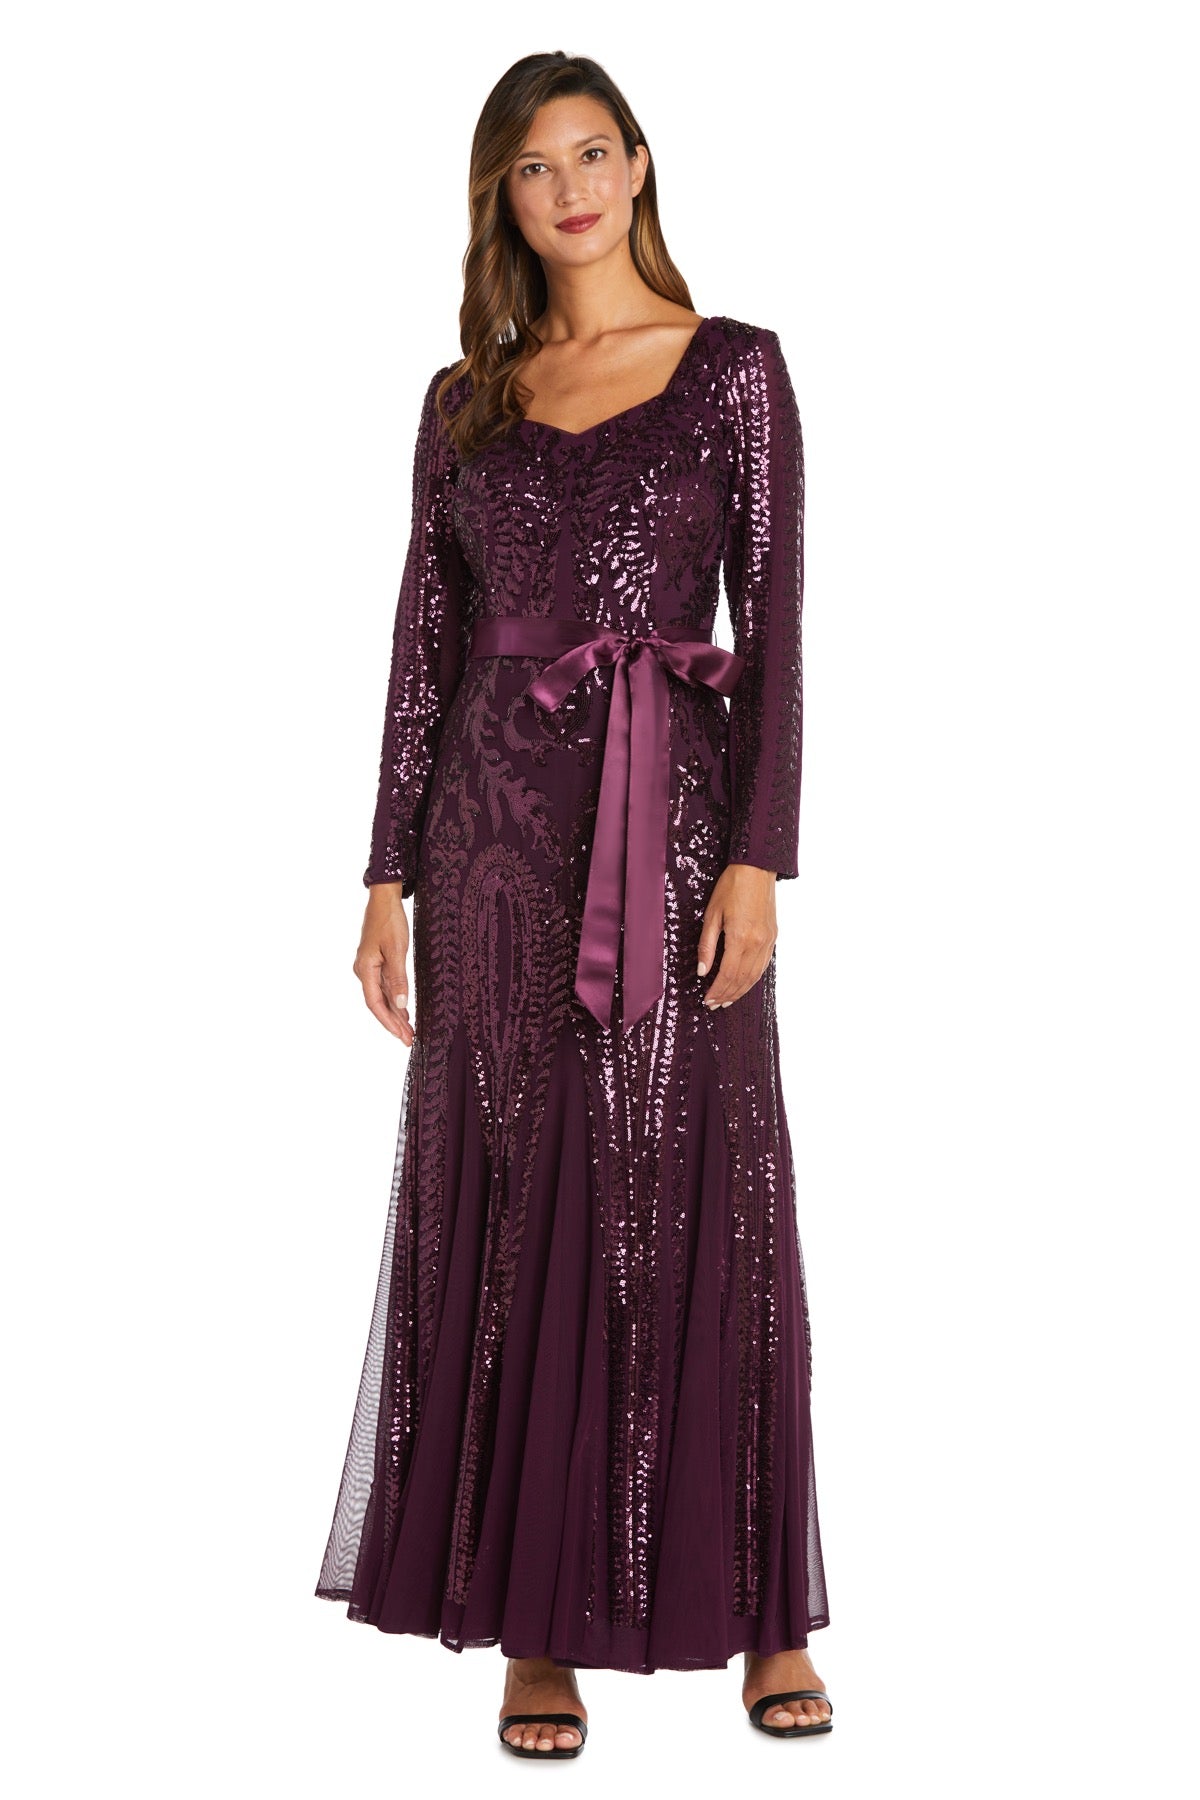 R&M Richards 2384 Long Mother Of Bride Cape Dress for $74.99 – The Dress  Outlet